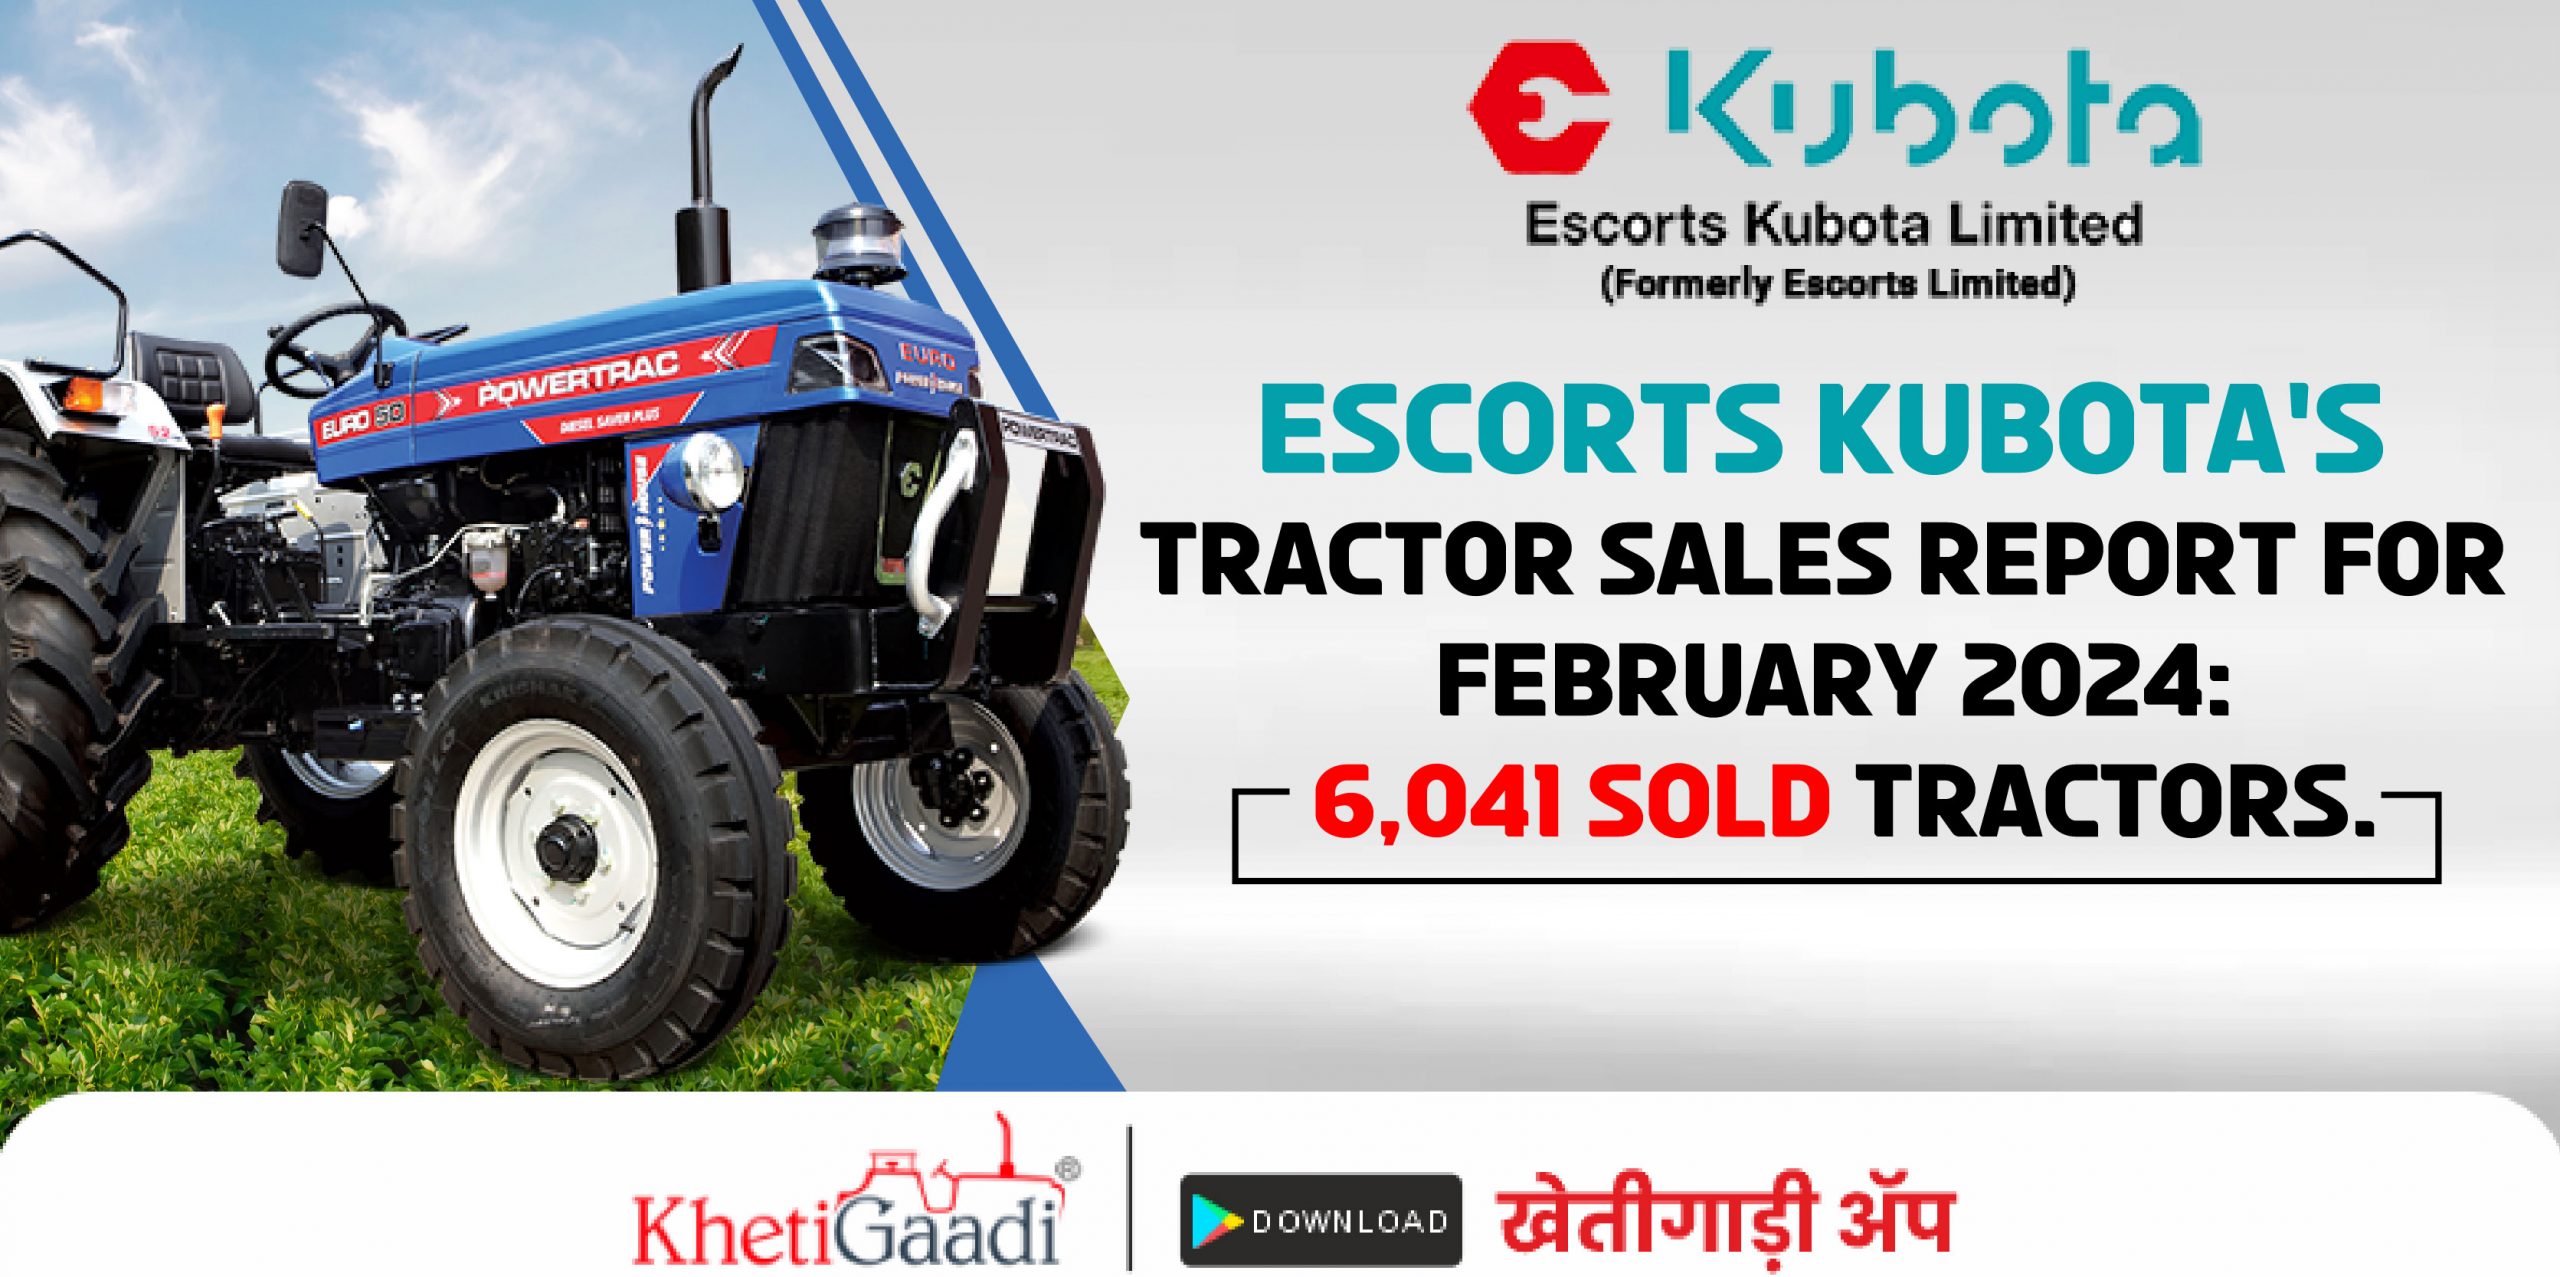 Escorts Kubota’s Tractor Sales Report for February 2024: 6,041sold tractors.